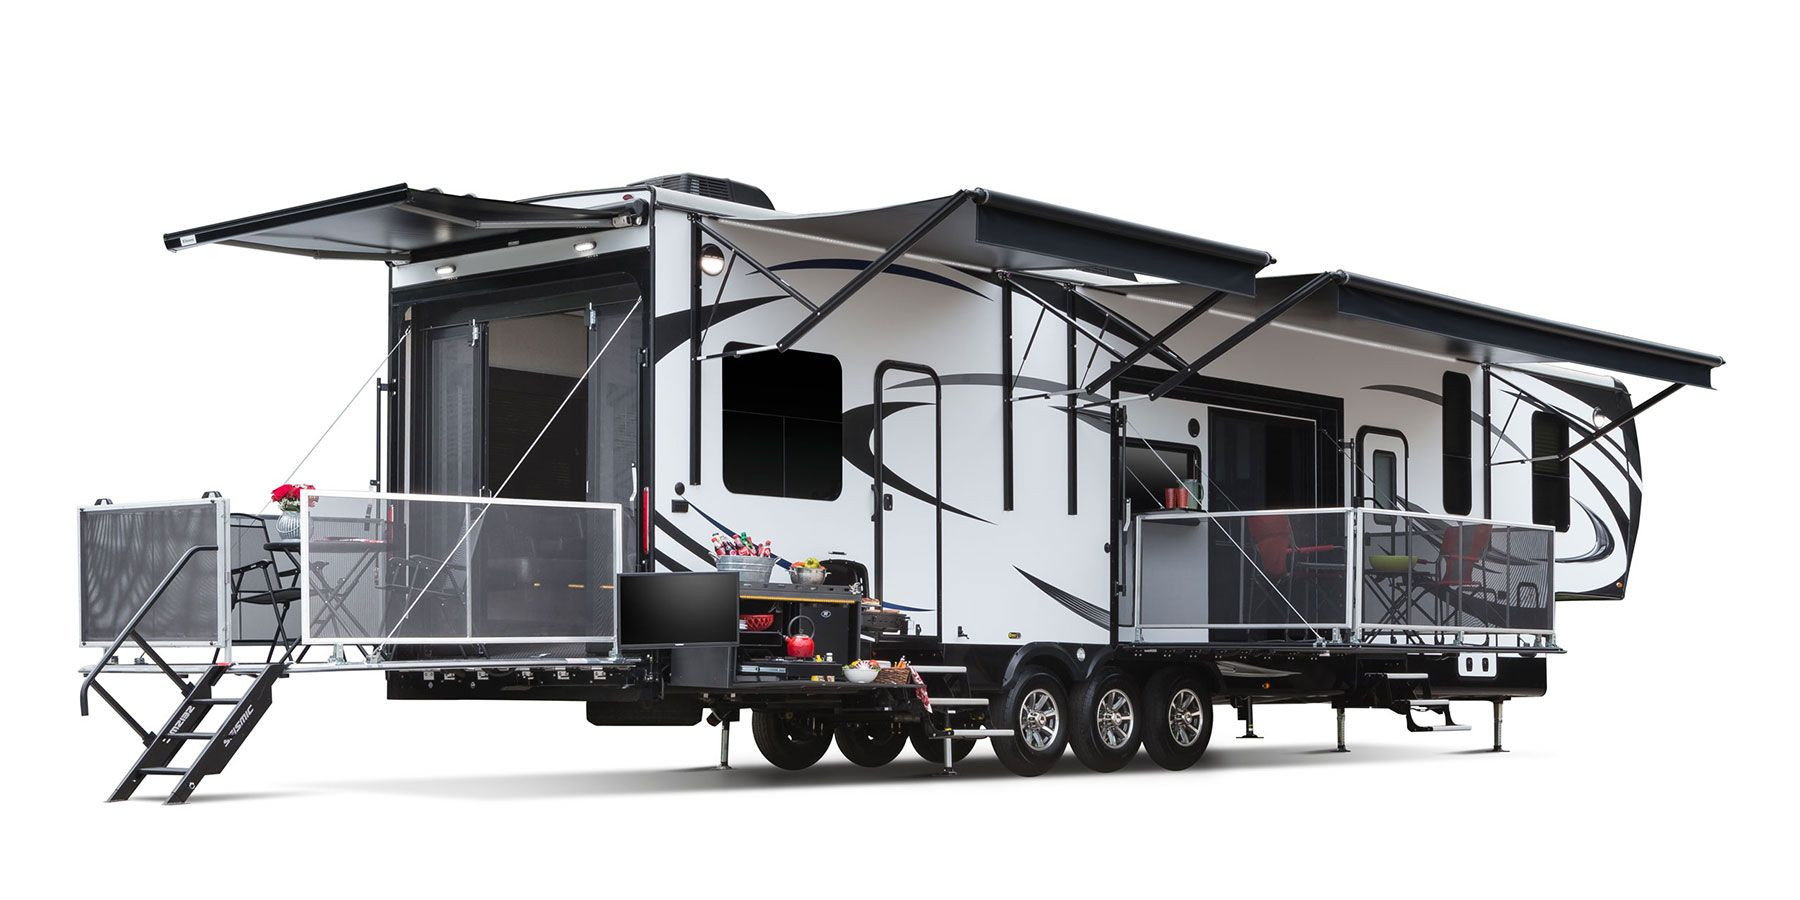 Toy Hauler With Outdoor Kitchen
 2017 Seismic Wave Toy Hauler